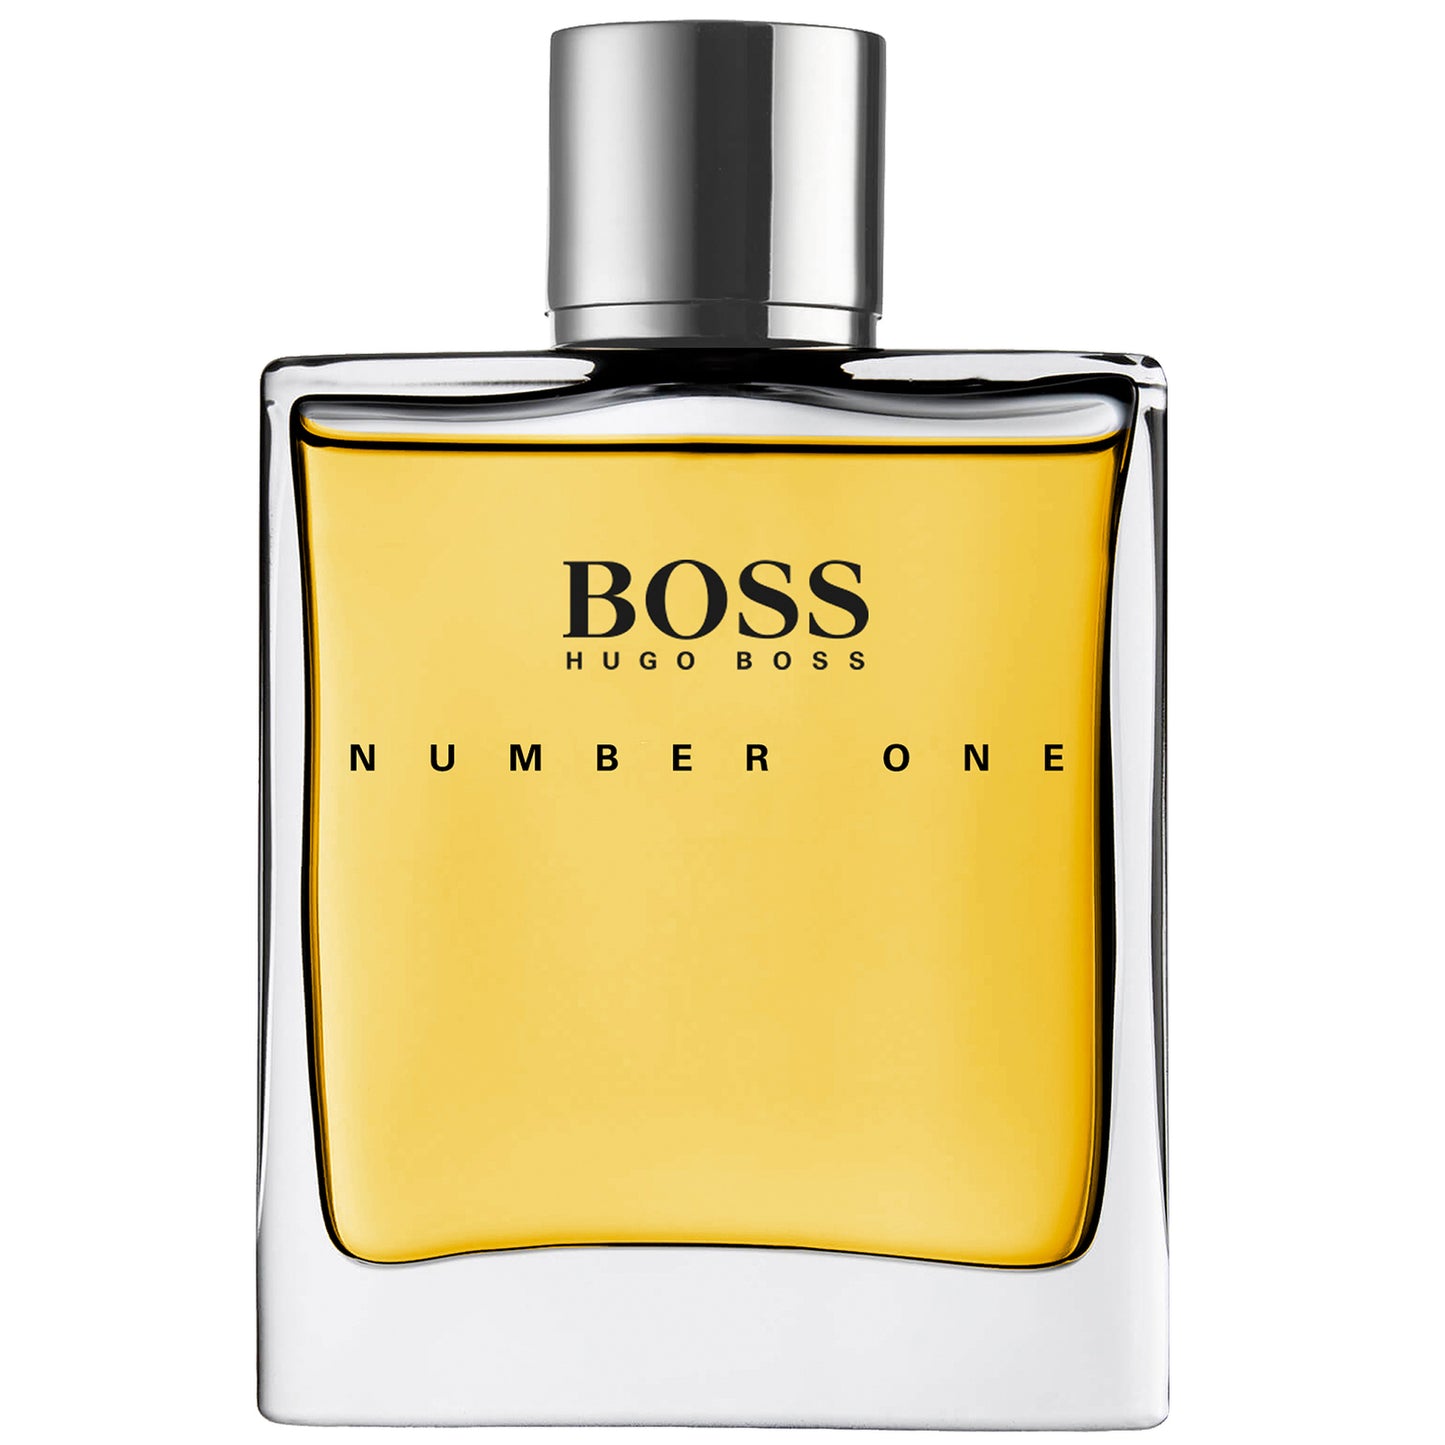 Boss - Number One EDT 100ml